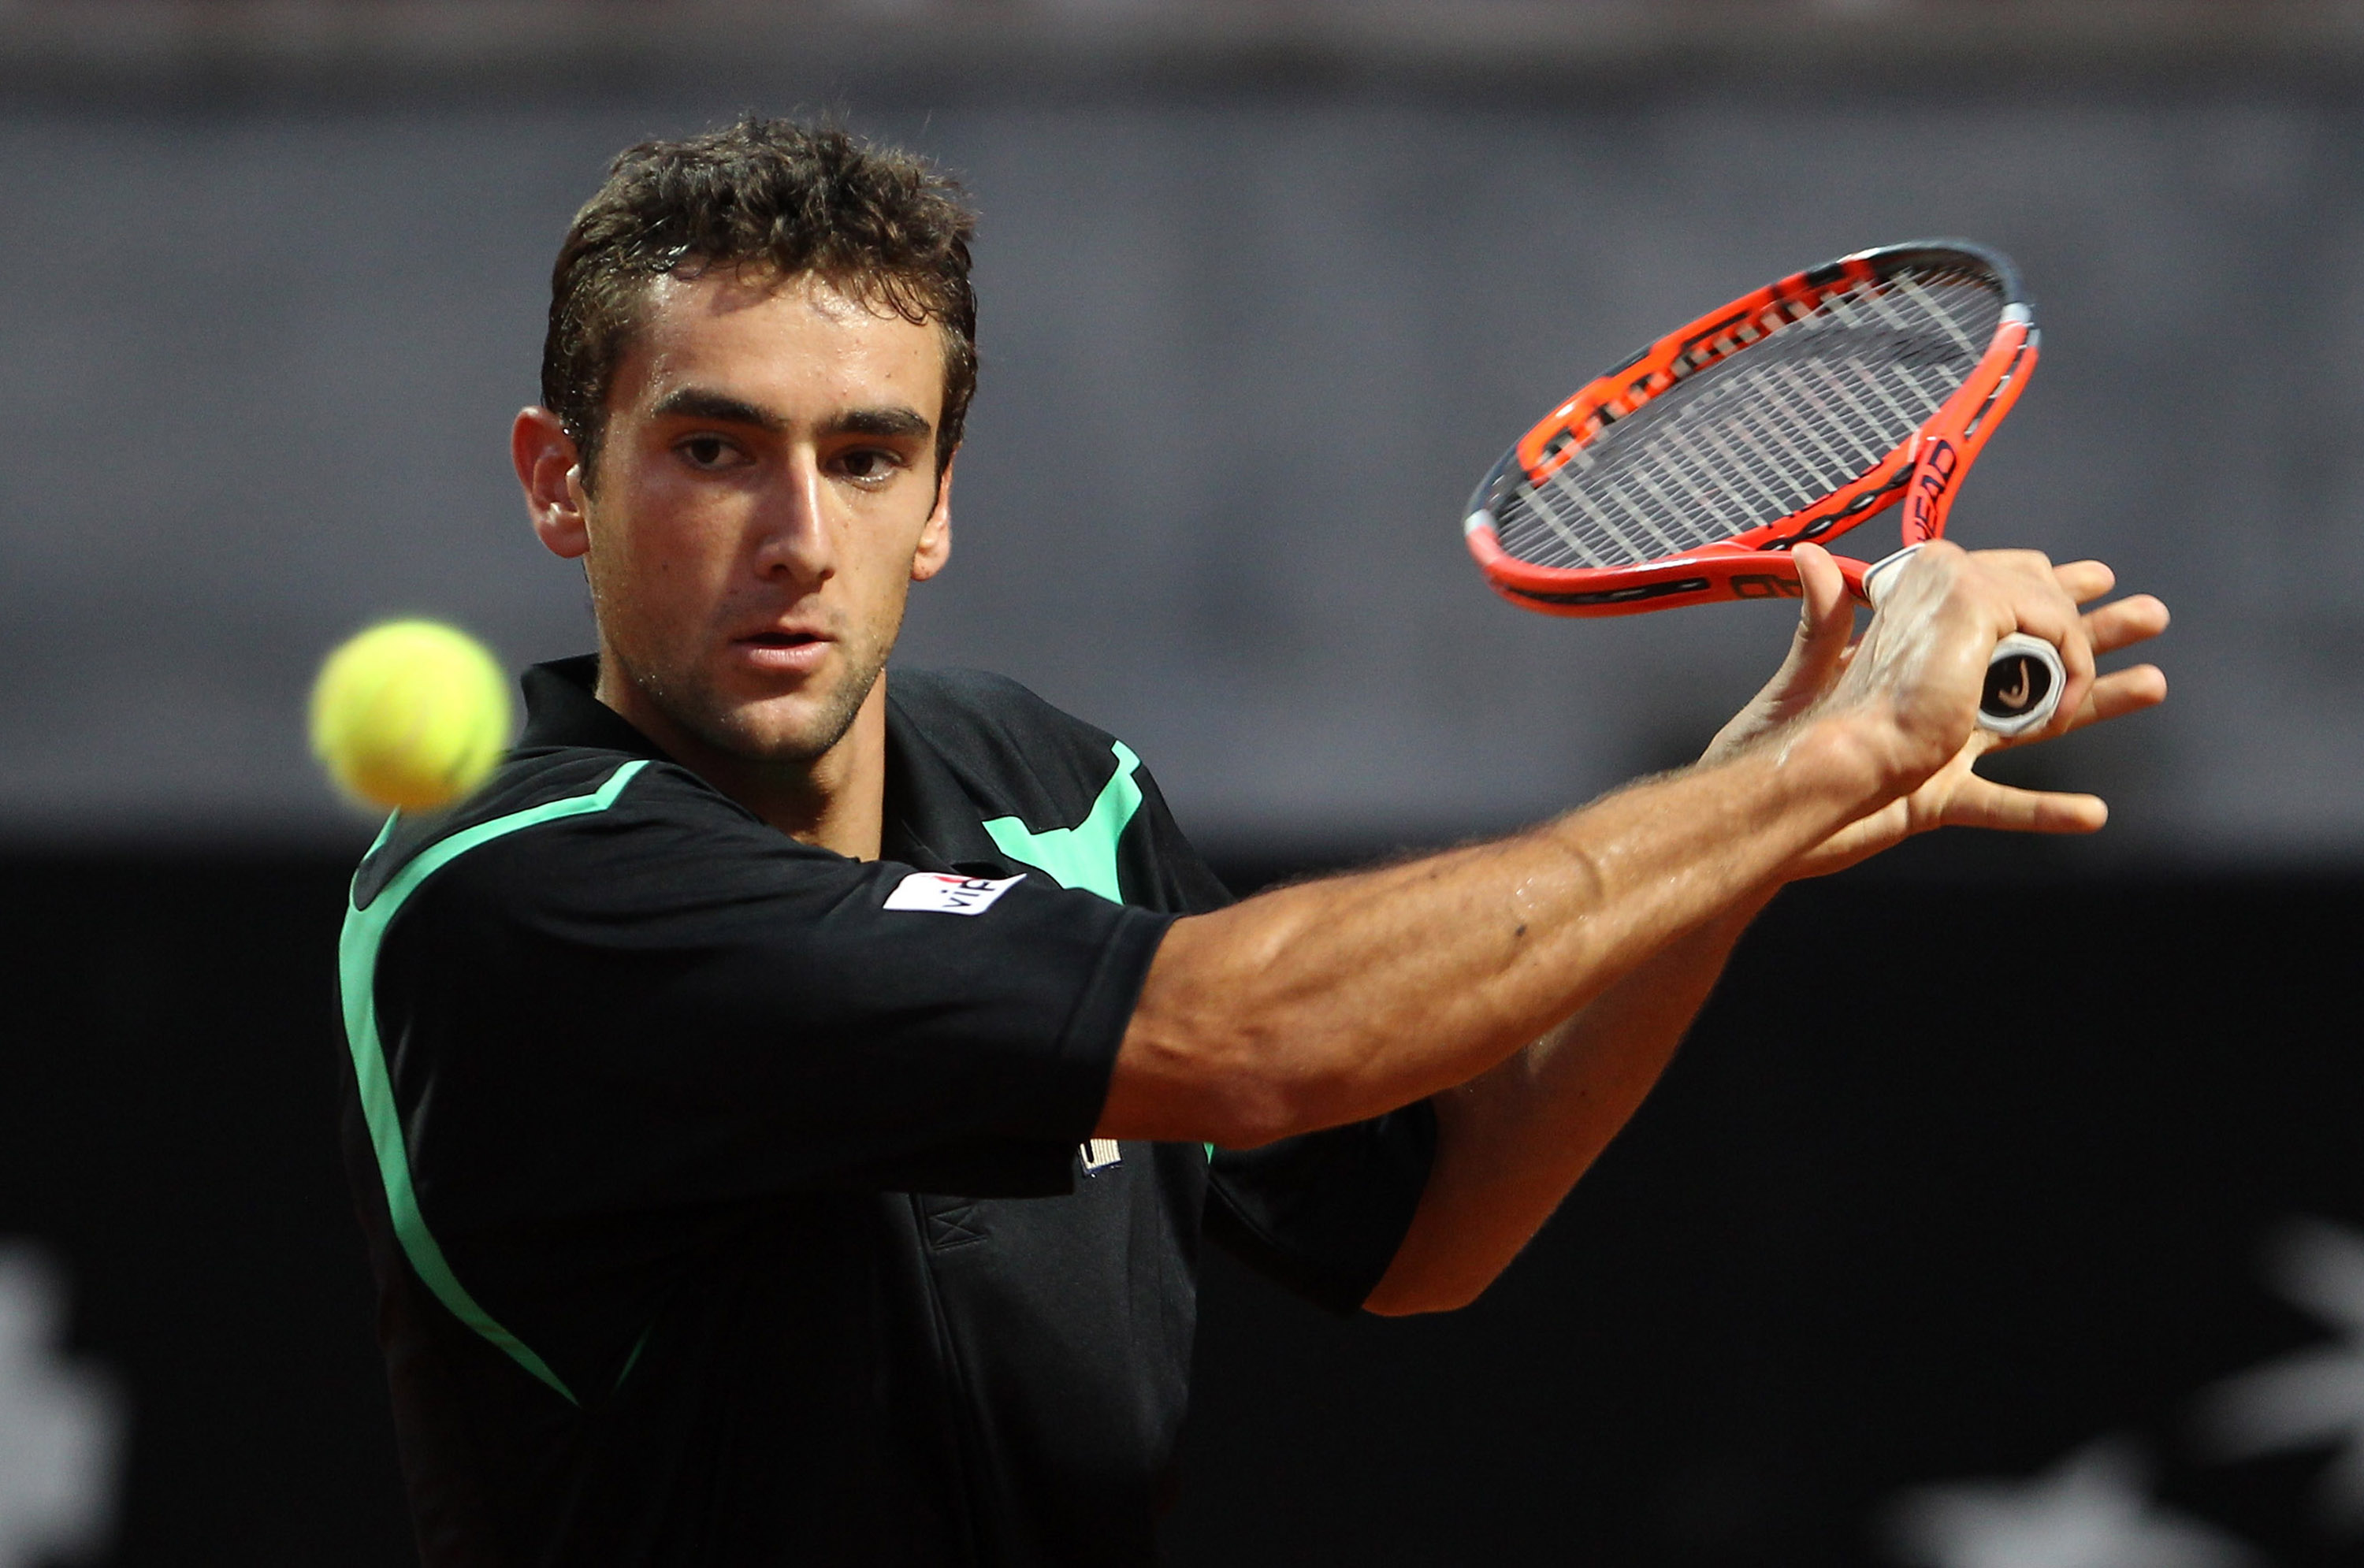 ROME - APRIL 28:  Marin Cilic of Croatia in action against Feliciano Lopez of Spain during day four of the ATP Masters Series - Rome at the Foro Italico Tennis Centre on April 28, 2010 in Rome, Italy.  (Photo by Julian Finney/Getty Images)